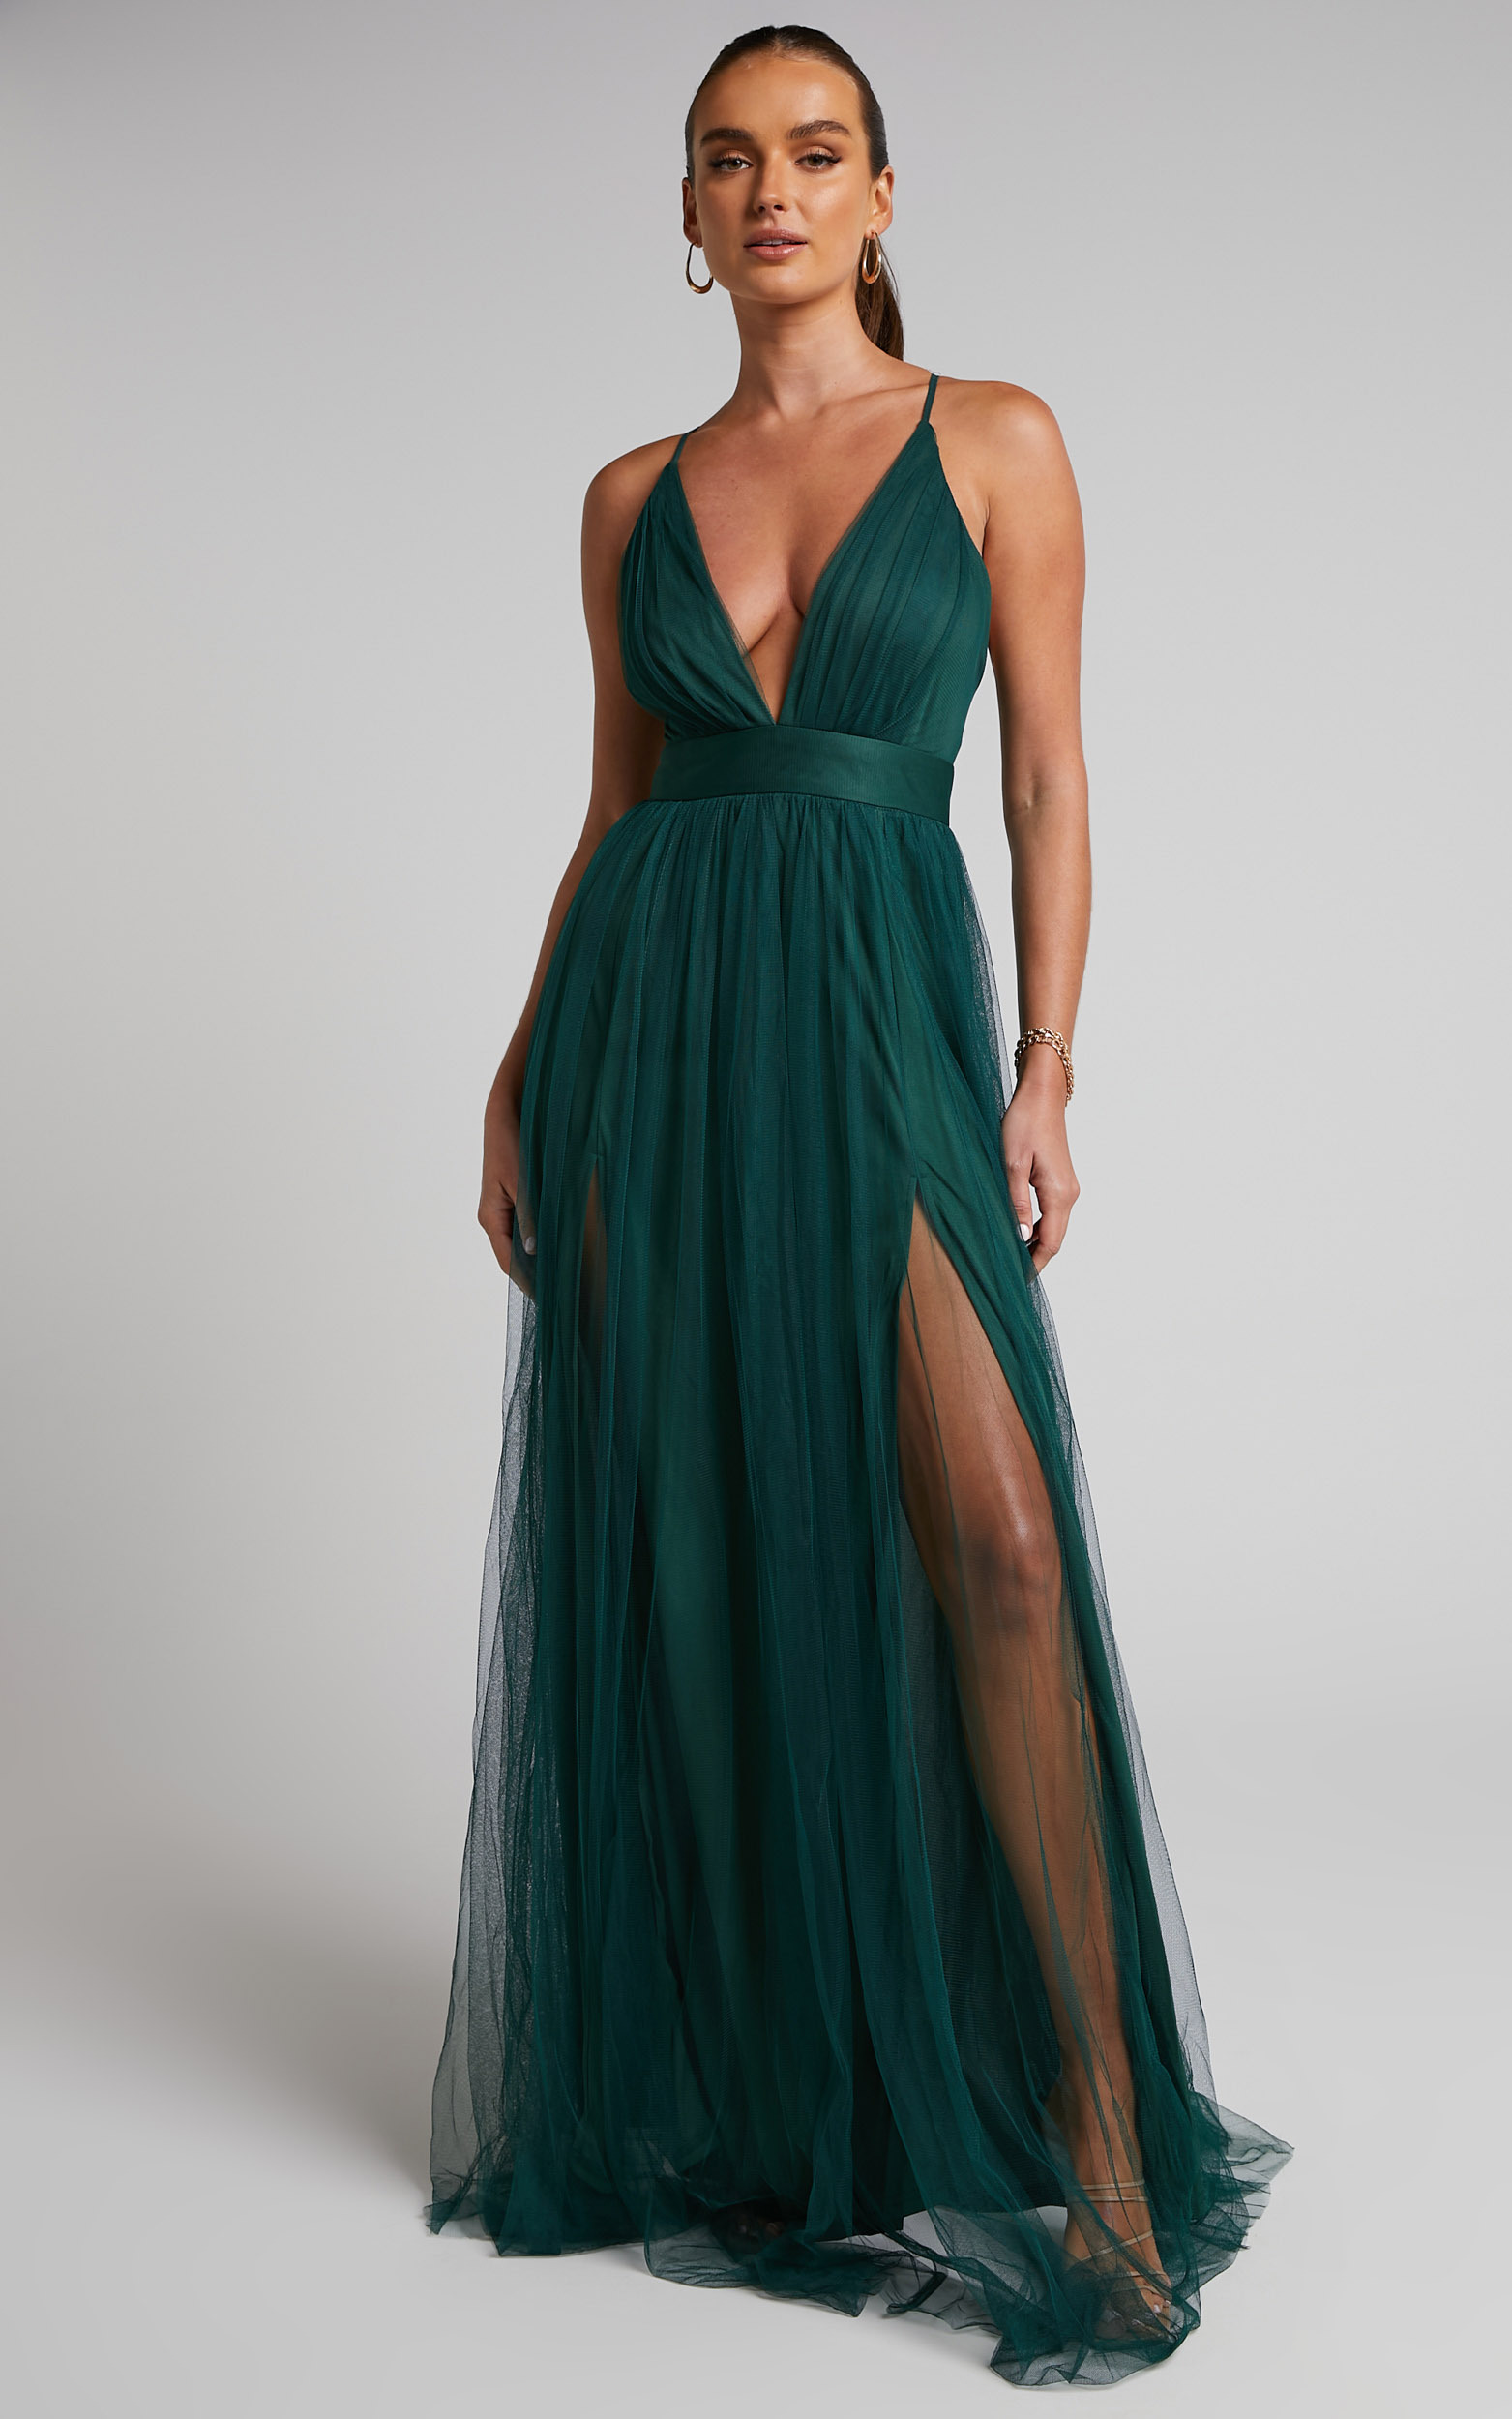 Celebrate Tonight Maxi Dress - Plunge Neck Tulle Dress in Hunter Green - L, GRN2, hi-res image number null